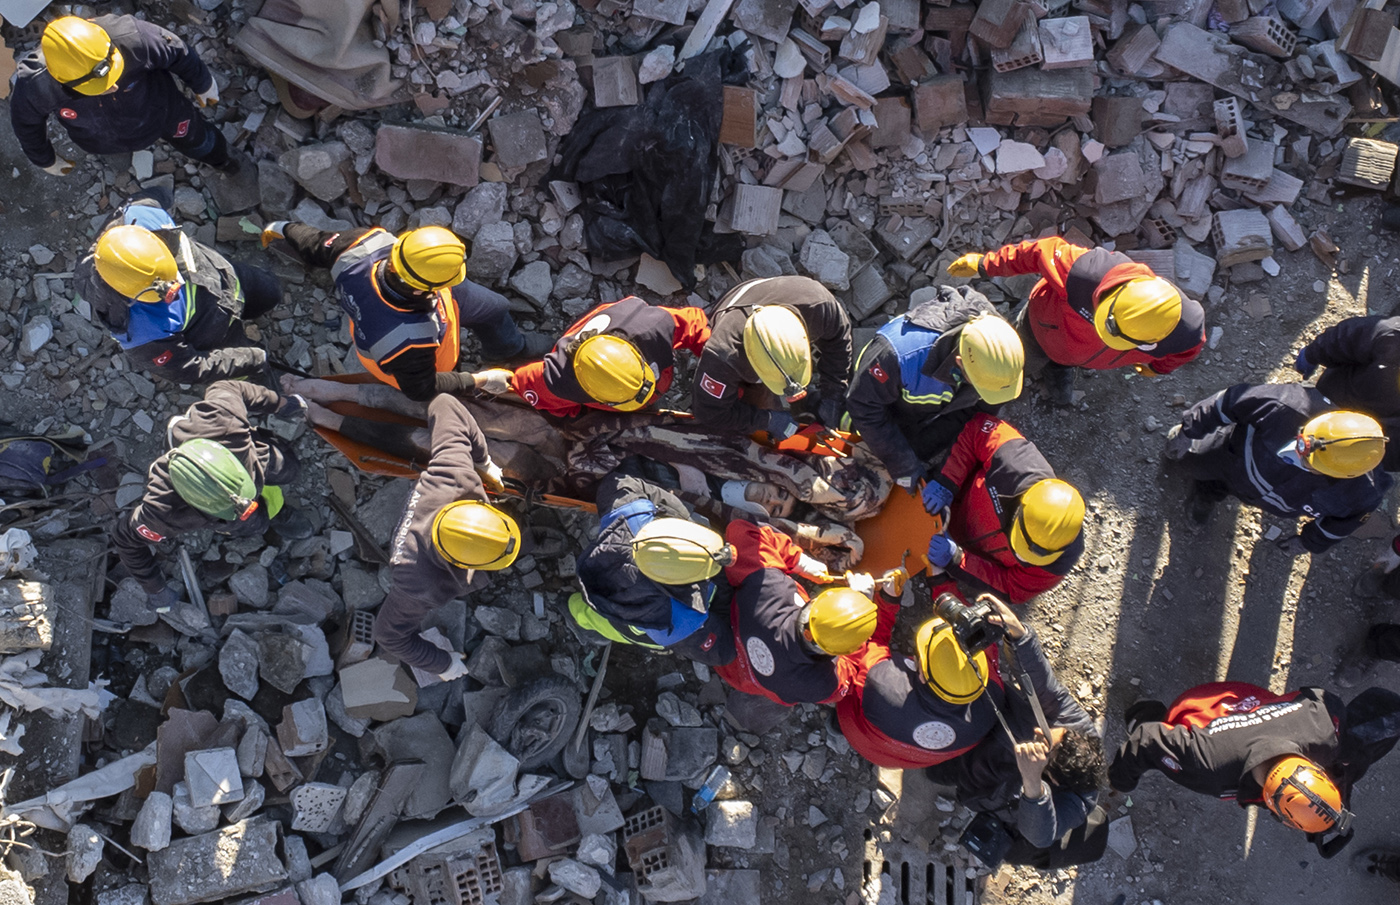 A photo taken with a drone shows carry a survivor who was rescued from a site of a collapsed building after 60 hours an earthquake in Hatay, Turkey, 08 February 2023. Thousands of people died and thousands more were injured after major earthquakes struck southern Turkey and northern Syria on 06 February. Authorities fear the death toll will keep climbing as rescuers look for survivors across the region.